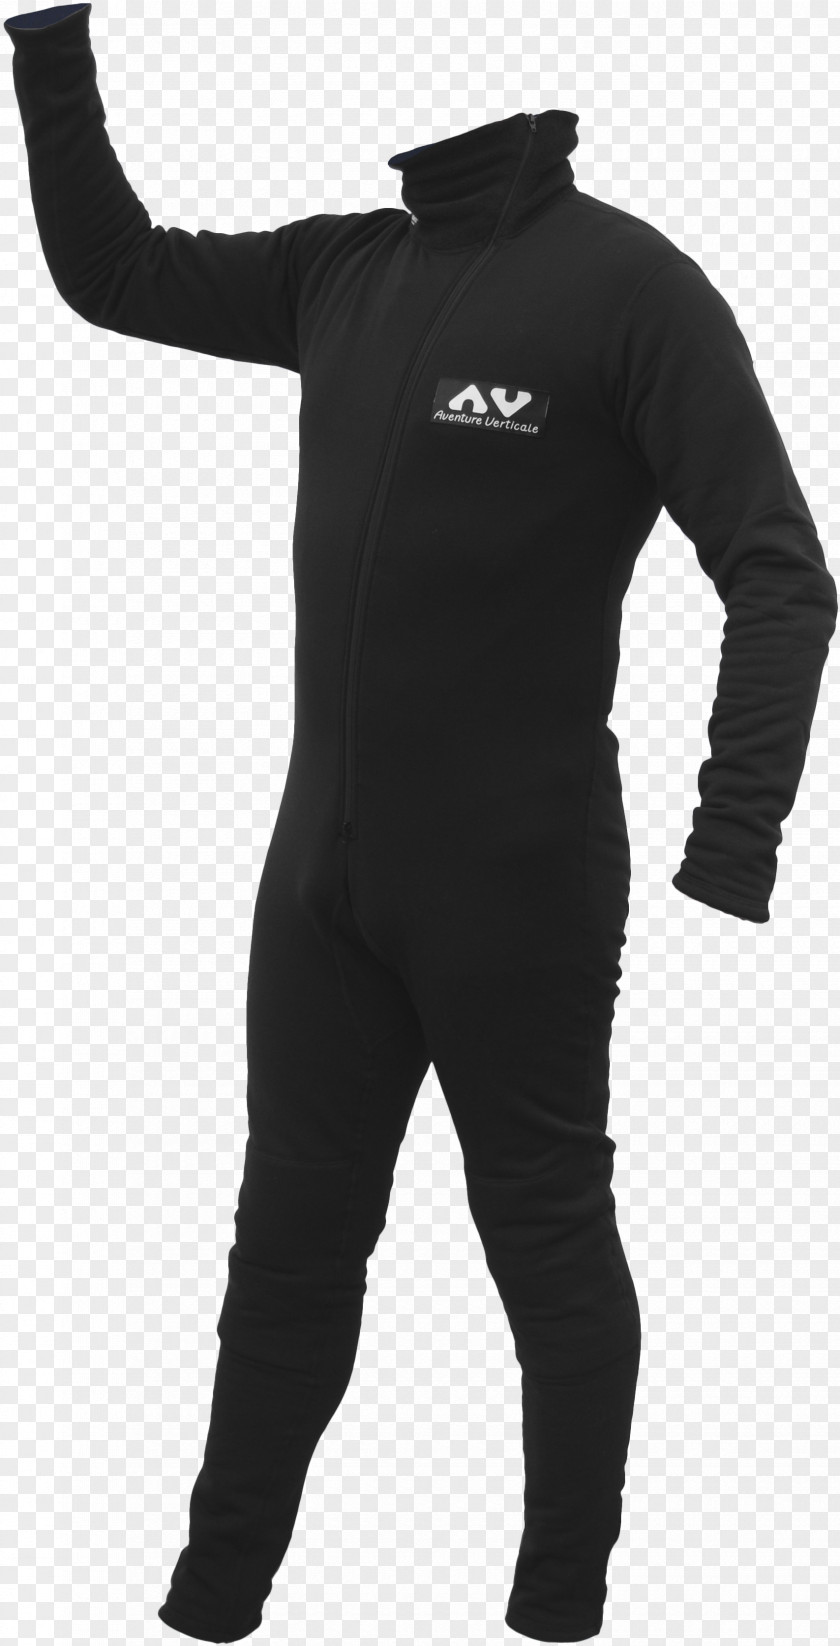 Rope Wetsuit Caving Speleology Canyoning Ascender PNG